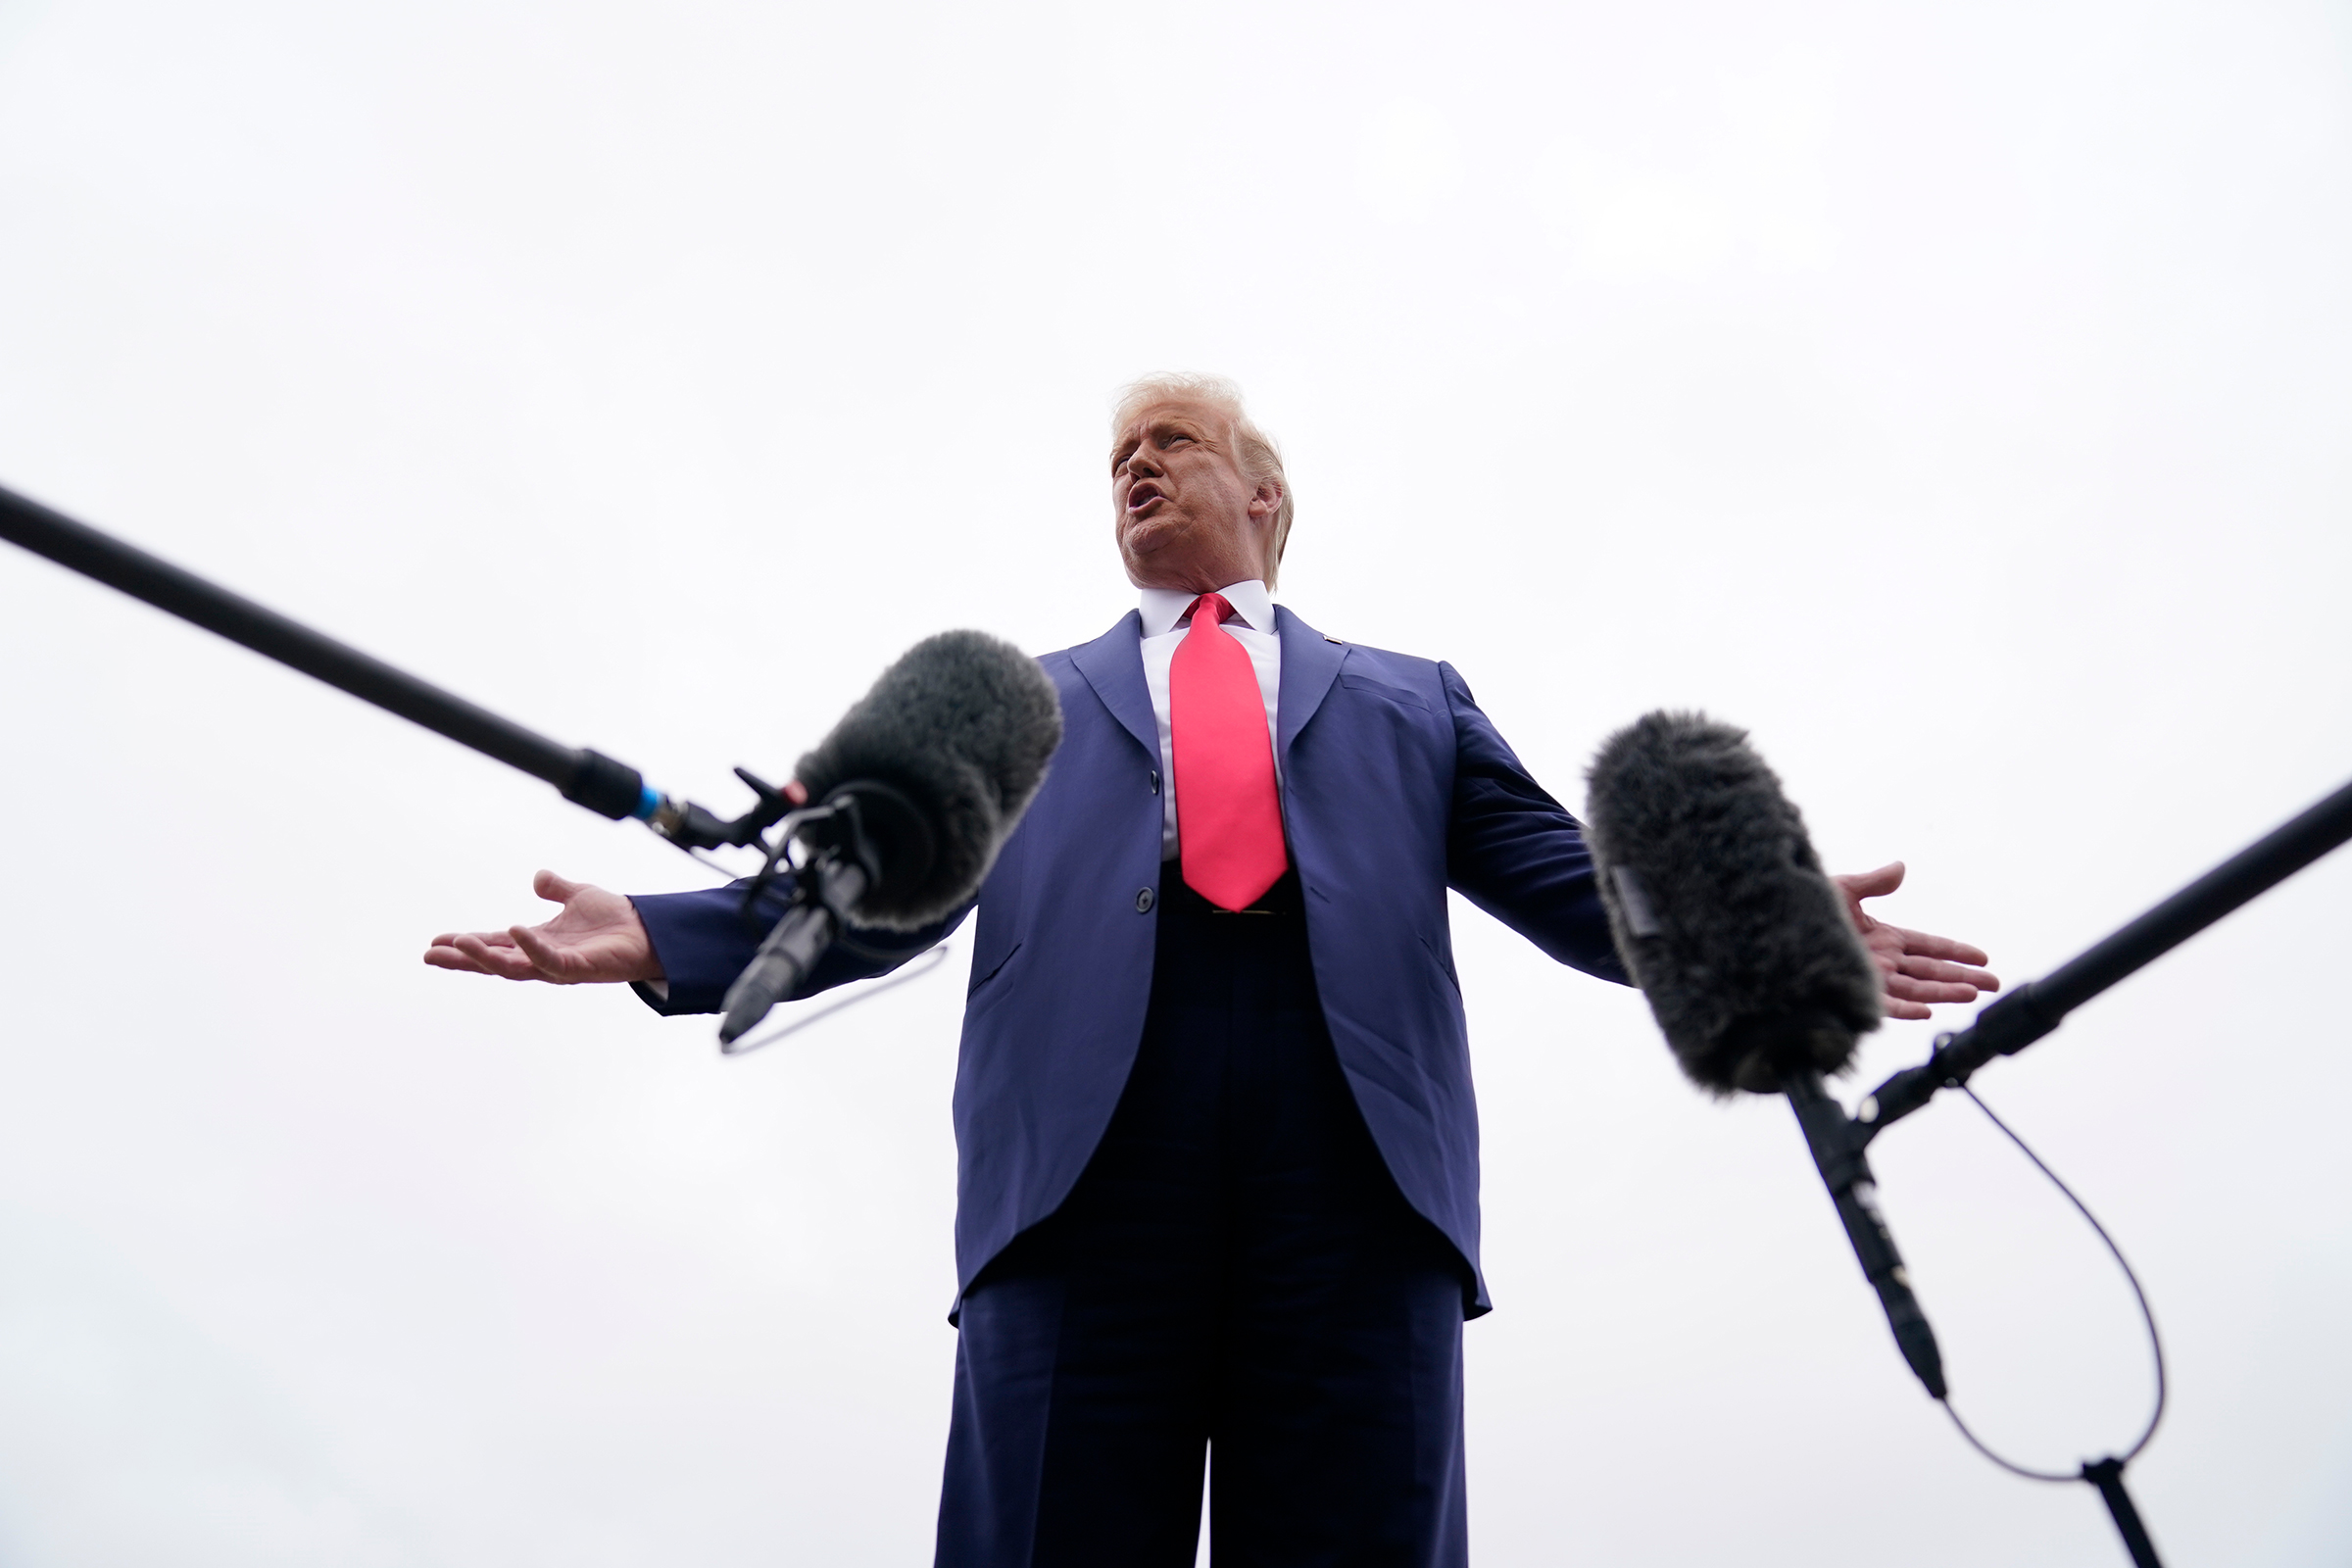 President Donald Trump speaks to the media in Andrews Air Force Base, Md., before boarding Air Force One for a trip to Kenosha, Wis., Sept. 1, 2020.